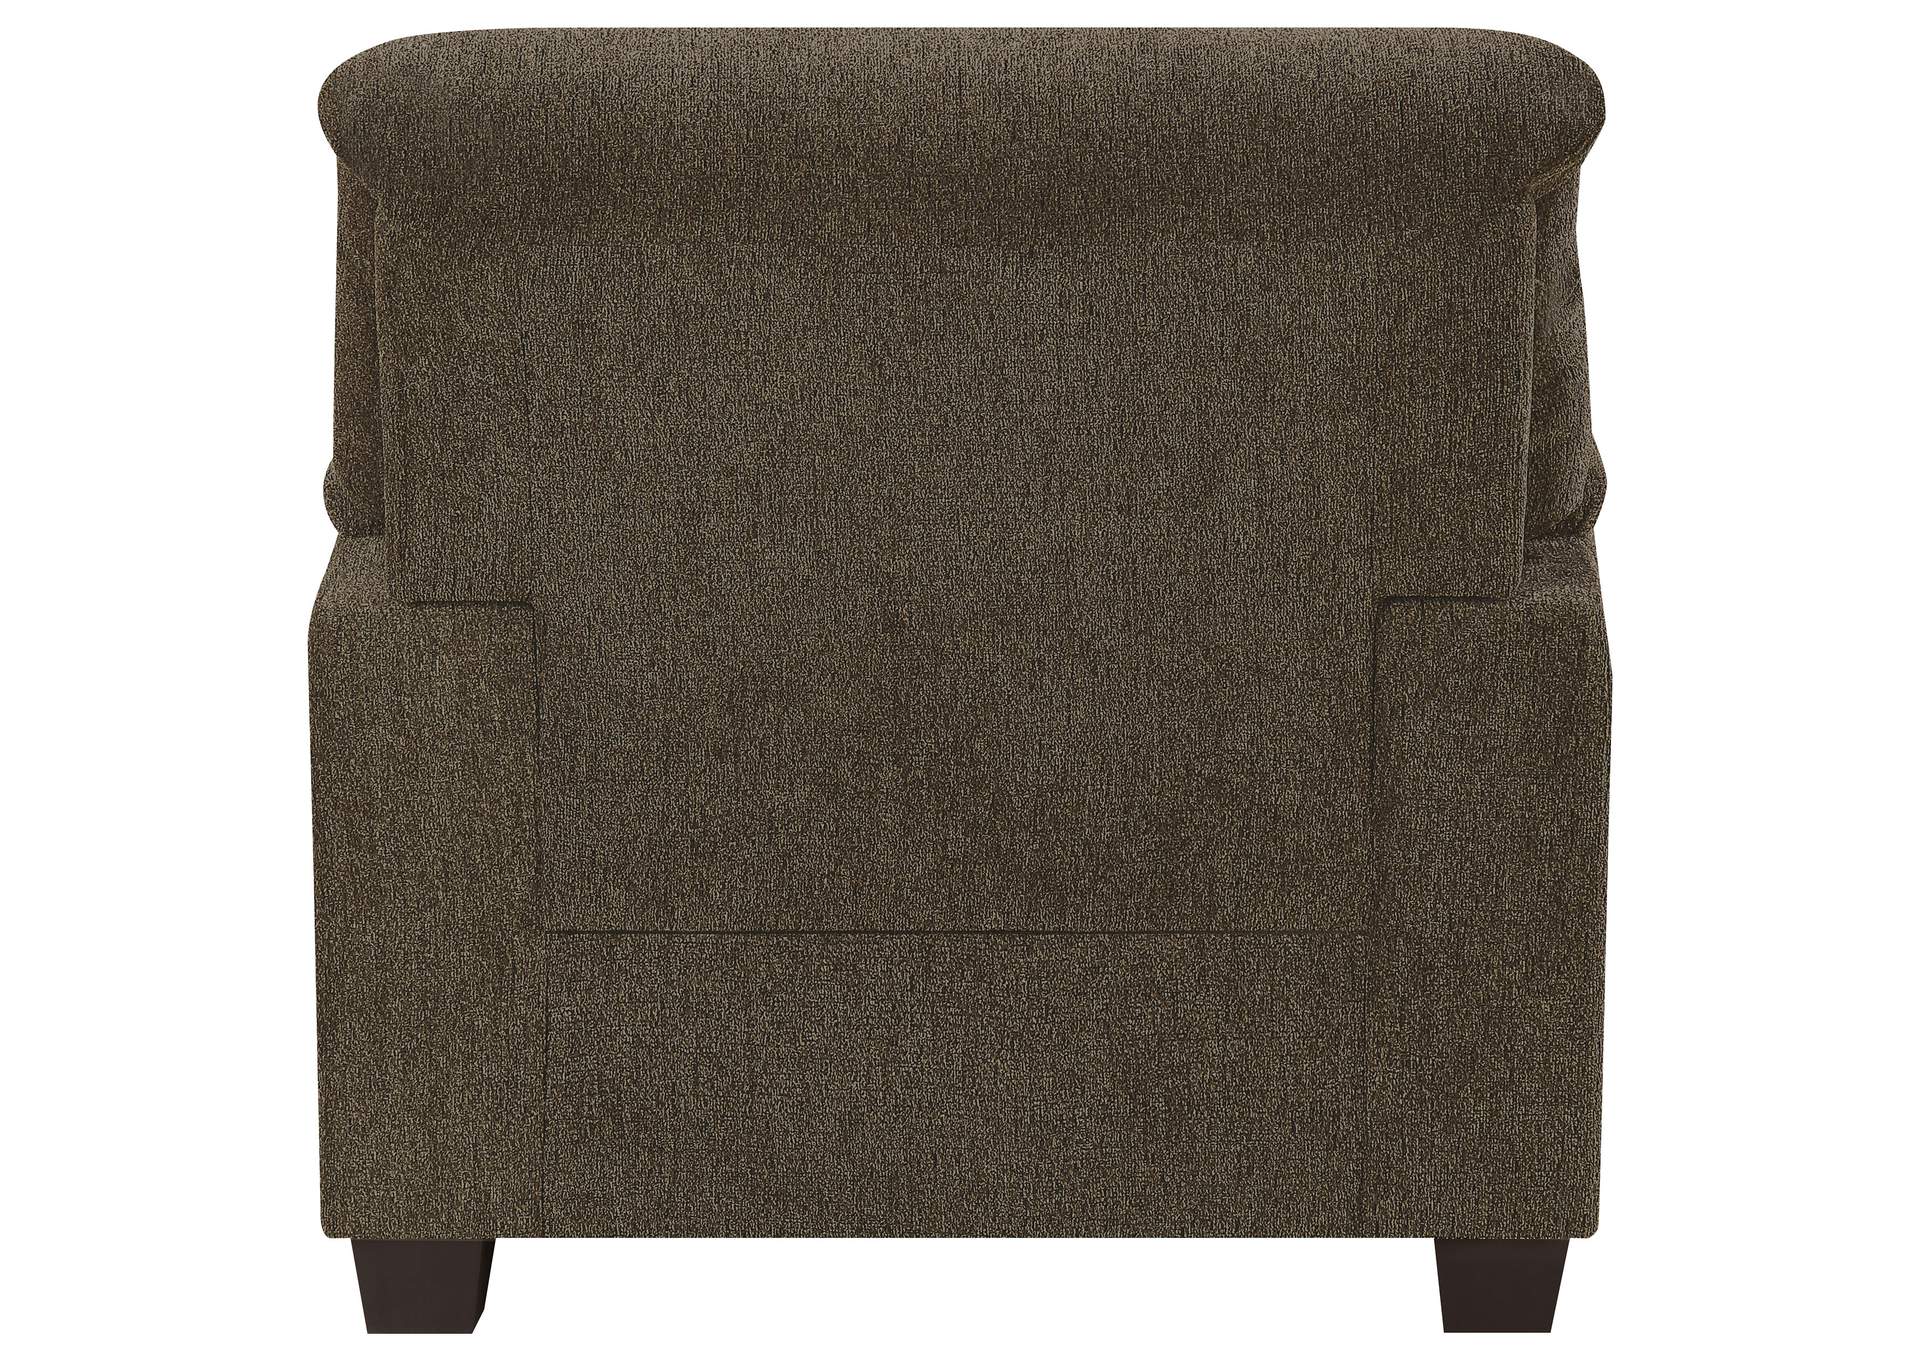 Clementine Upholstered Chair with Nailhead Trim Brown,Coaster Furniture